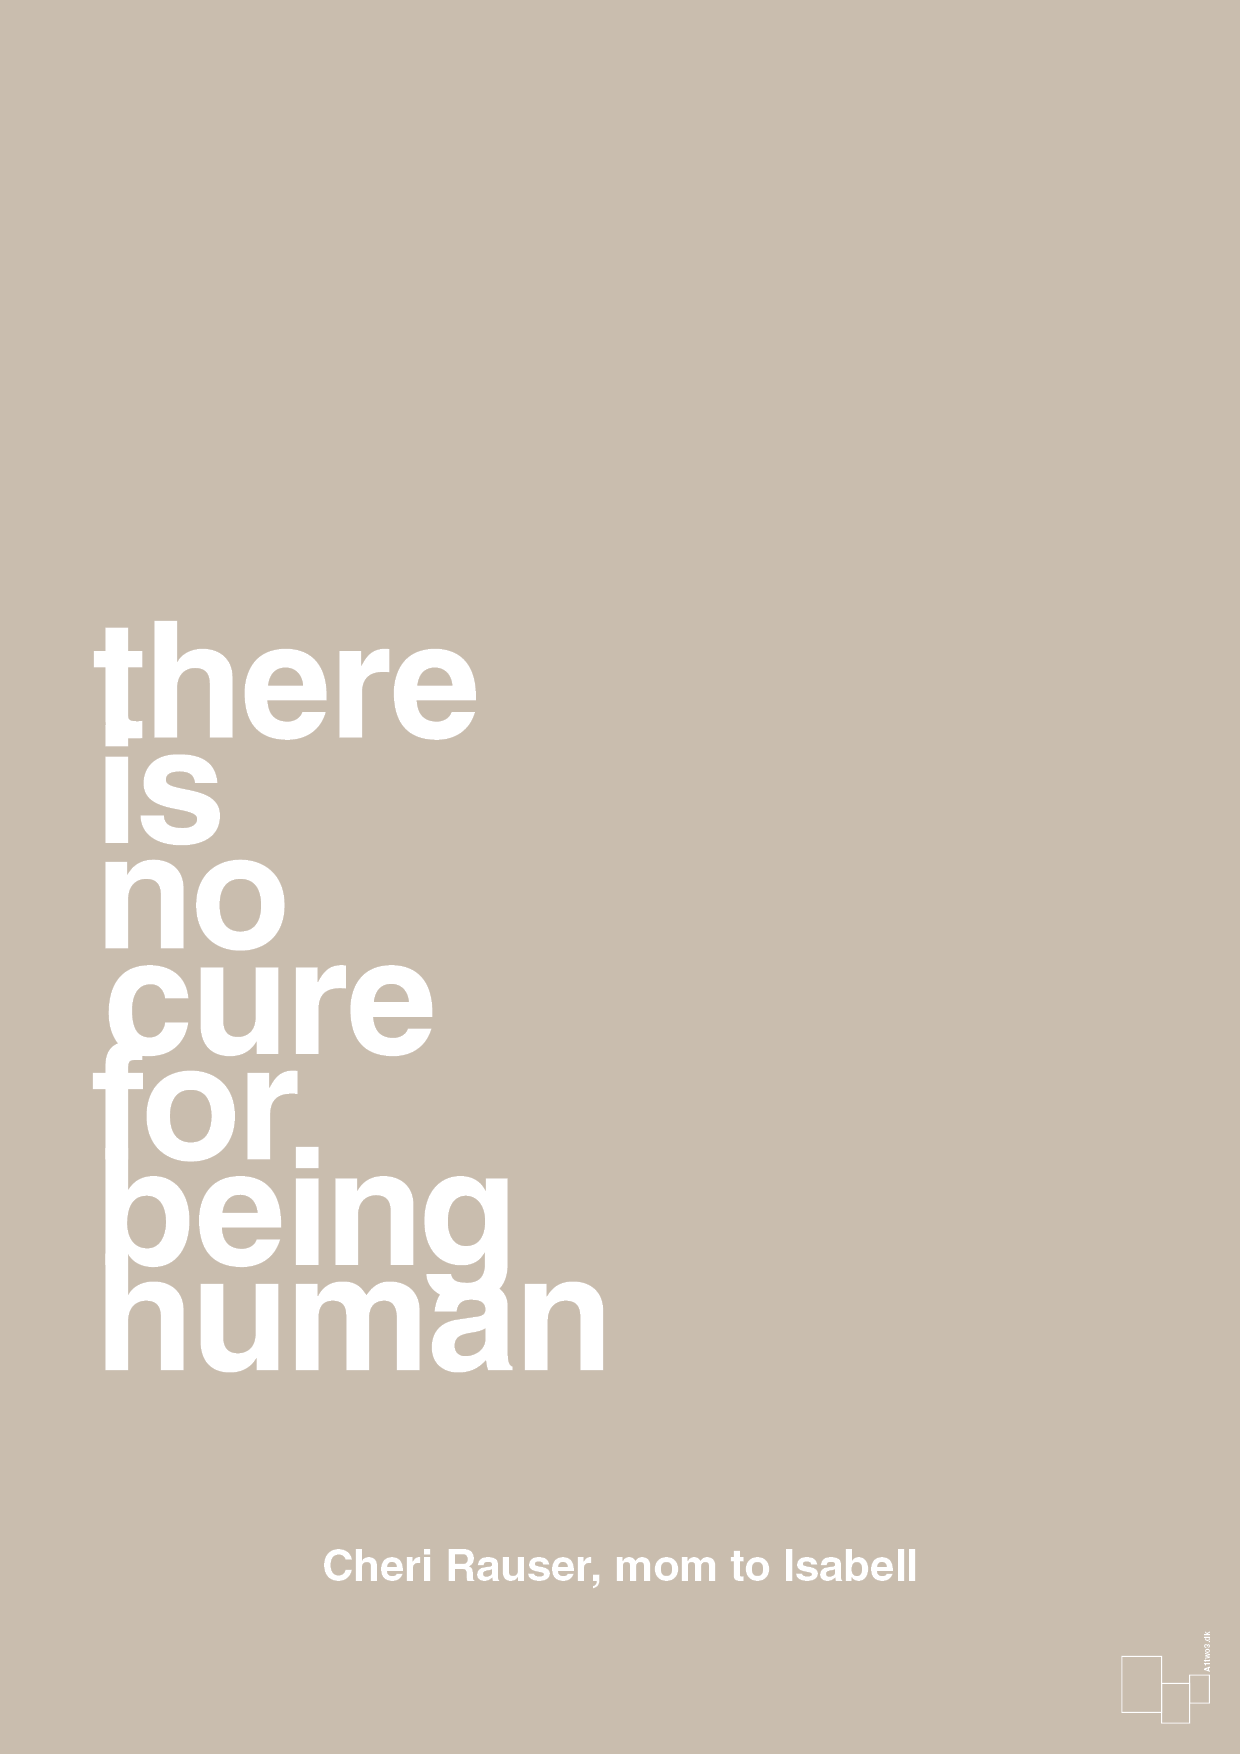 there is no cure for being human - Plakat med Samfund i Creamy Mushroom